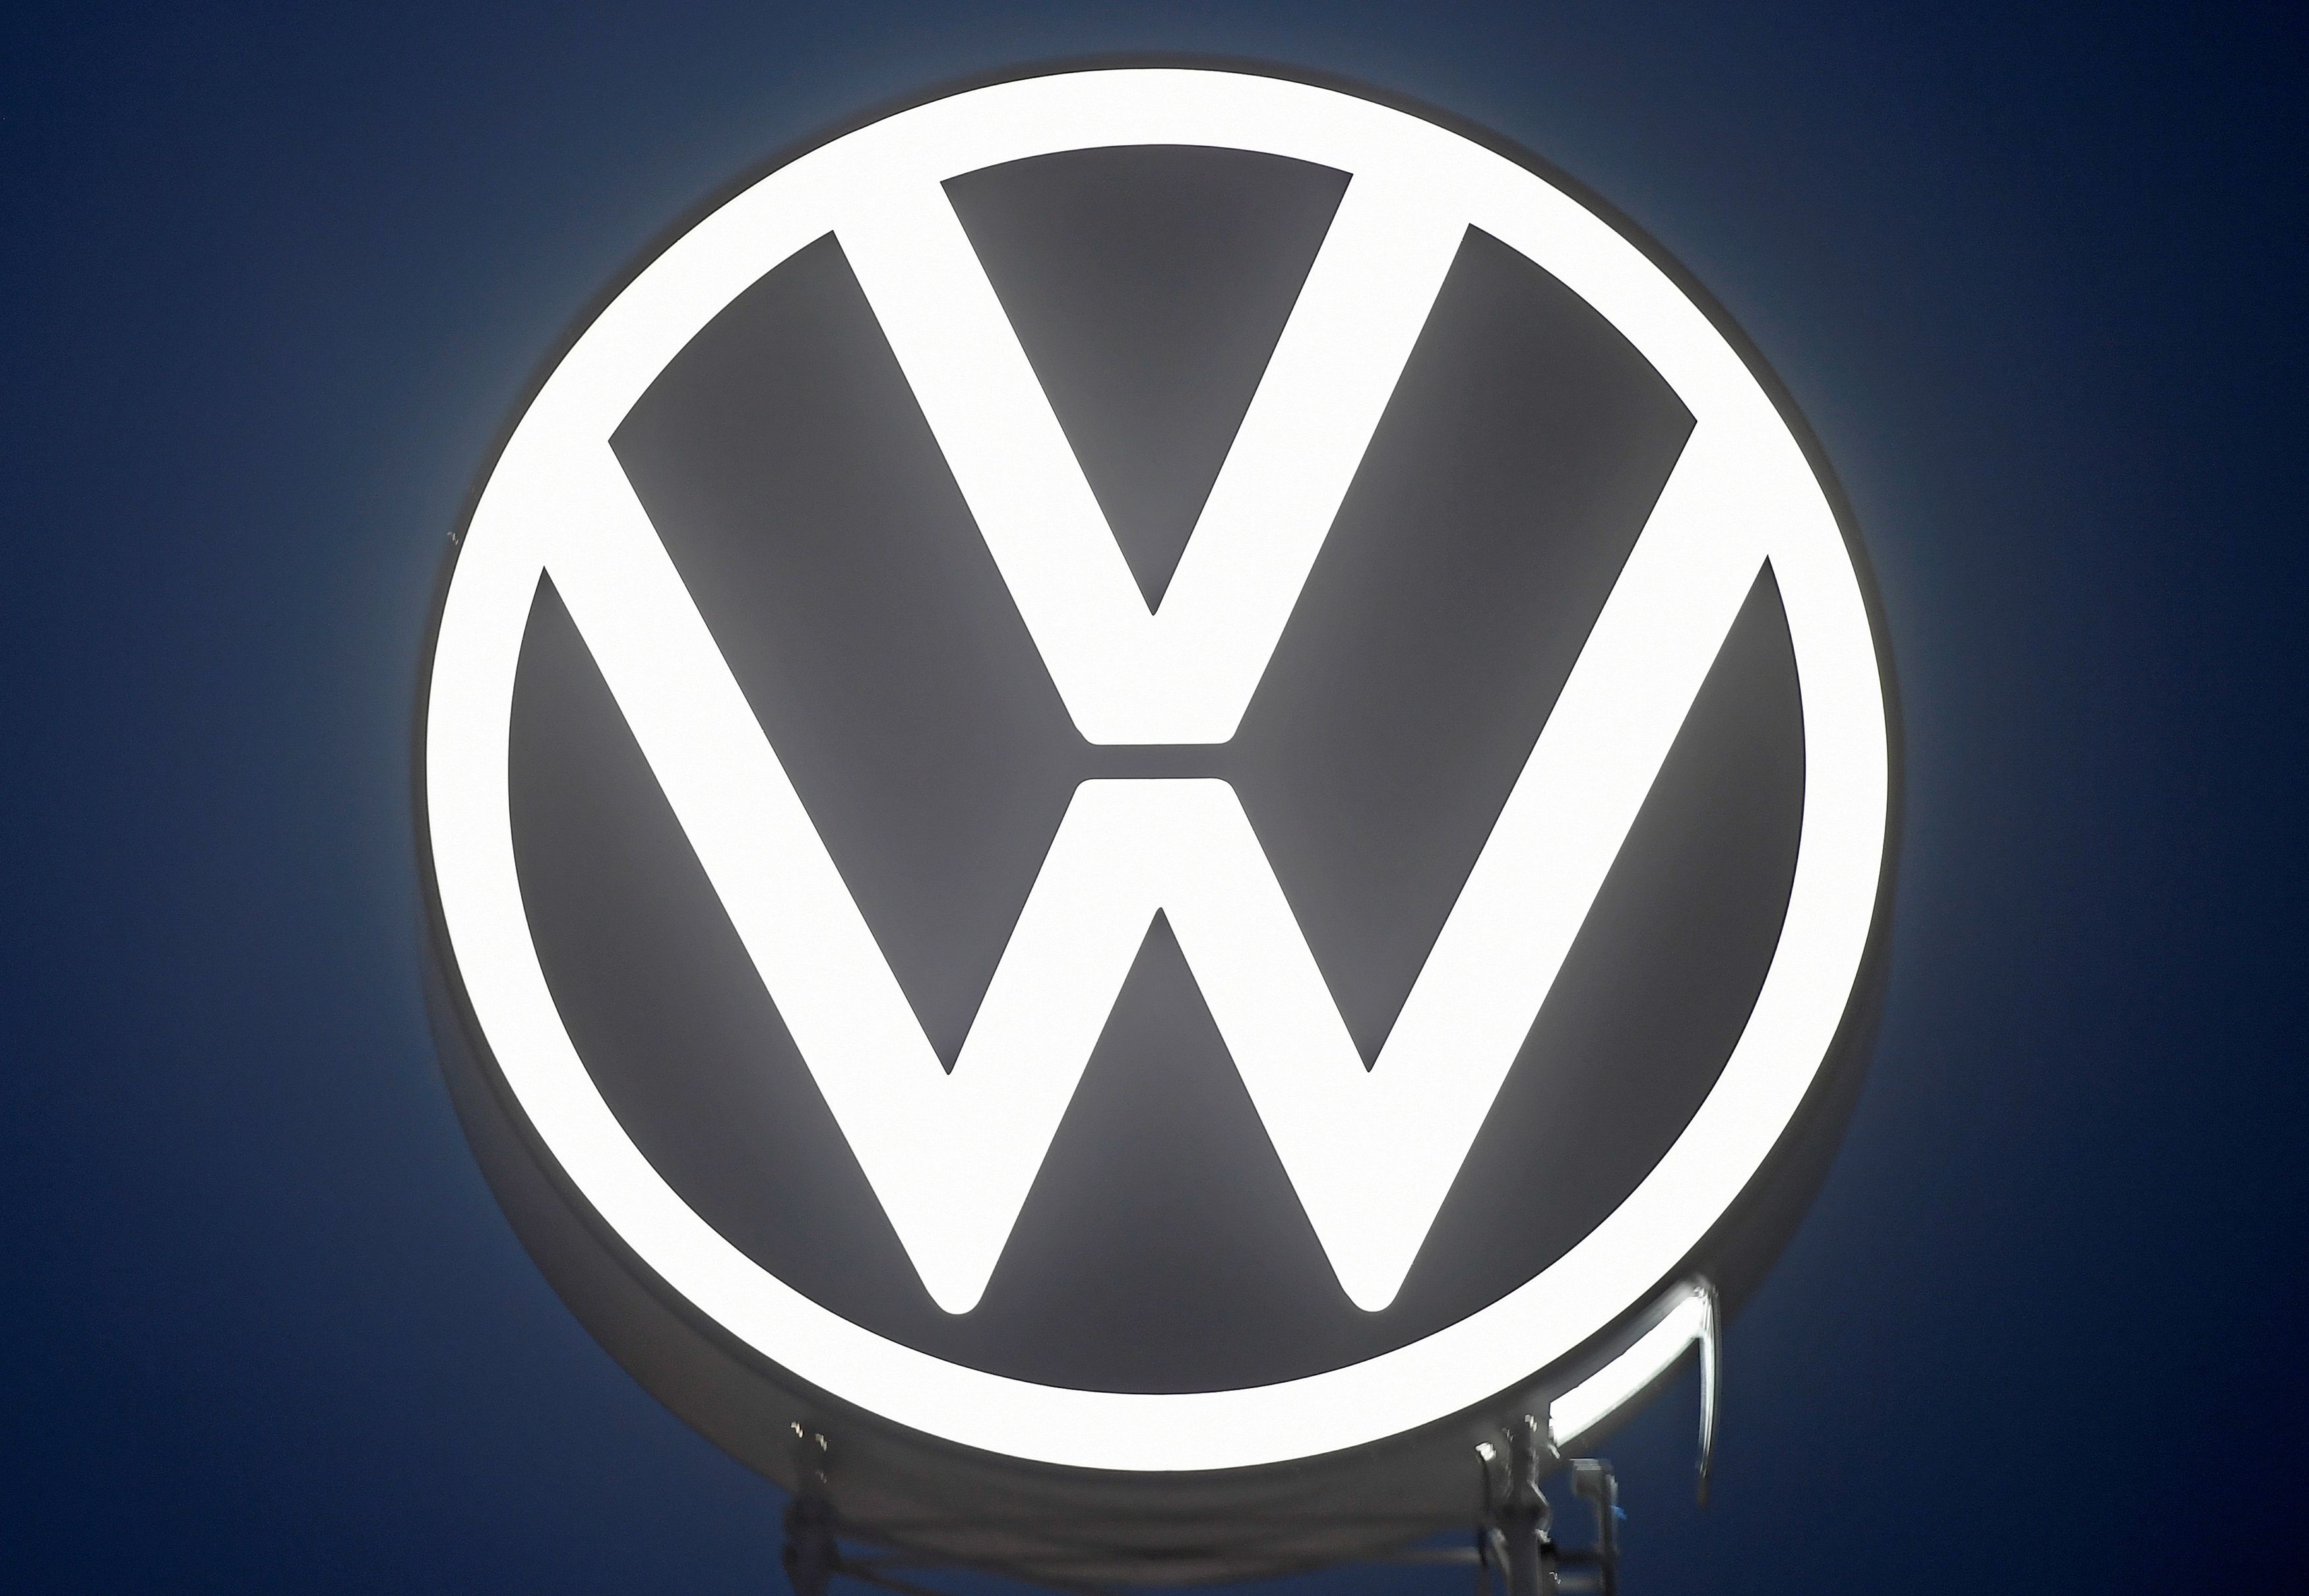 A new logo of German carmaker Volkswagen is unveiled at the VW headquarters in Wolfsburg, Germany September 9, 2019. REUTERS/Fabian Bimmer/File Photo